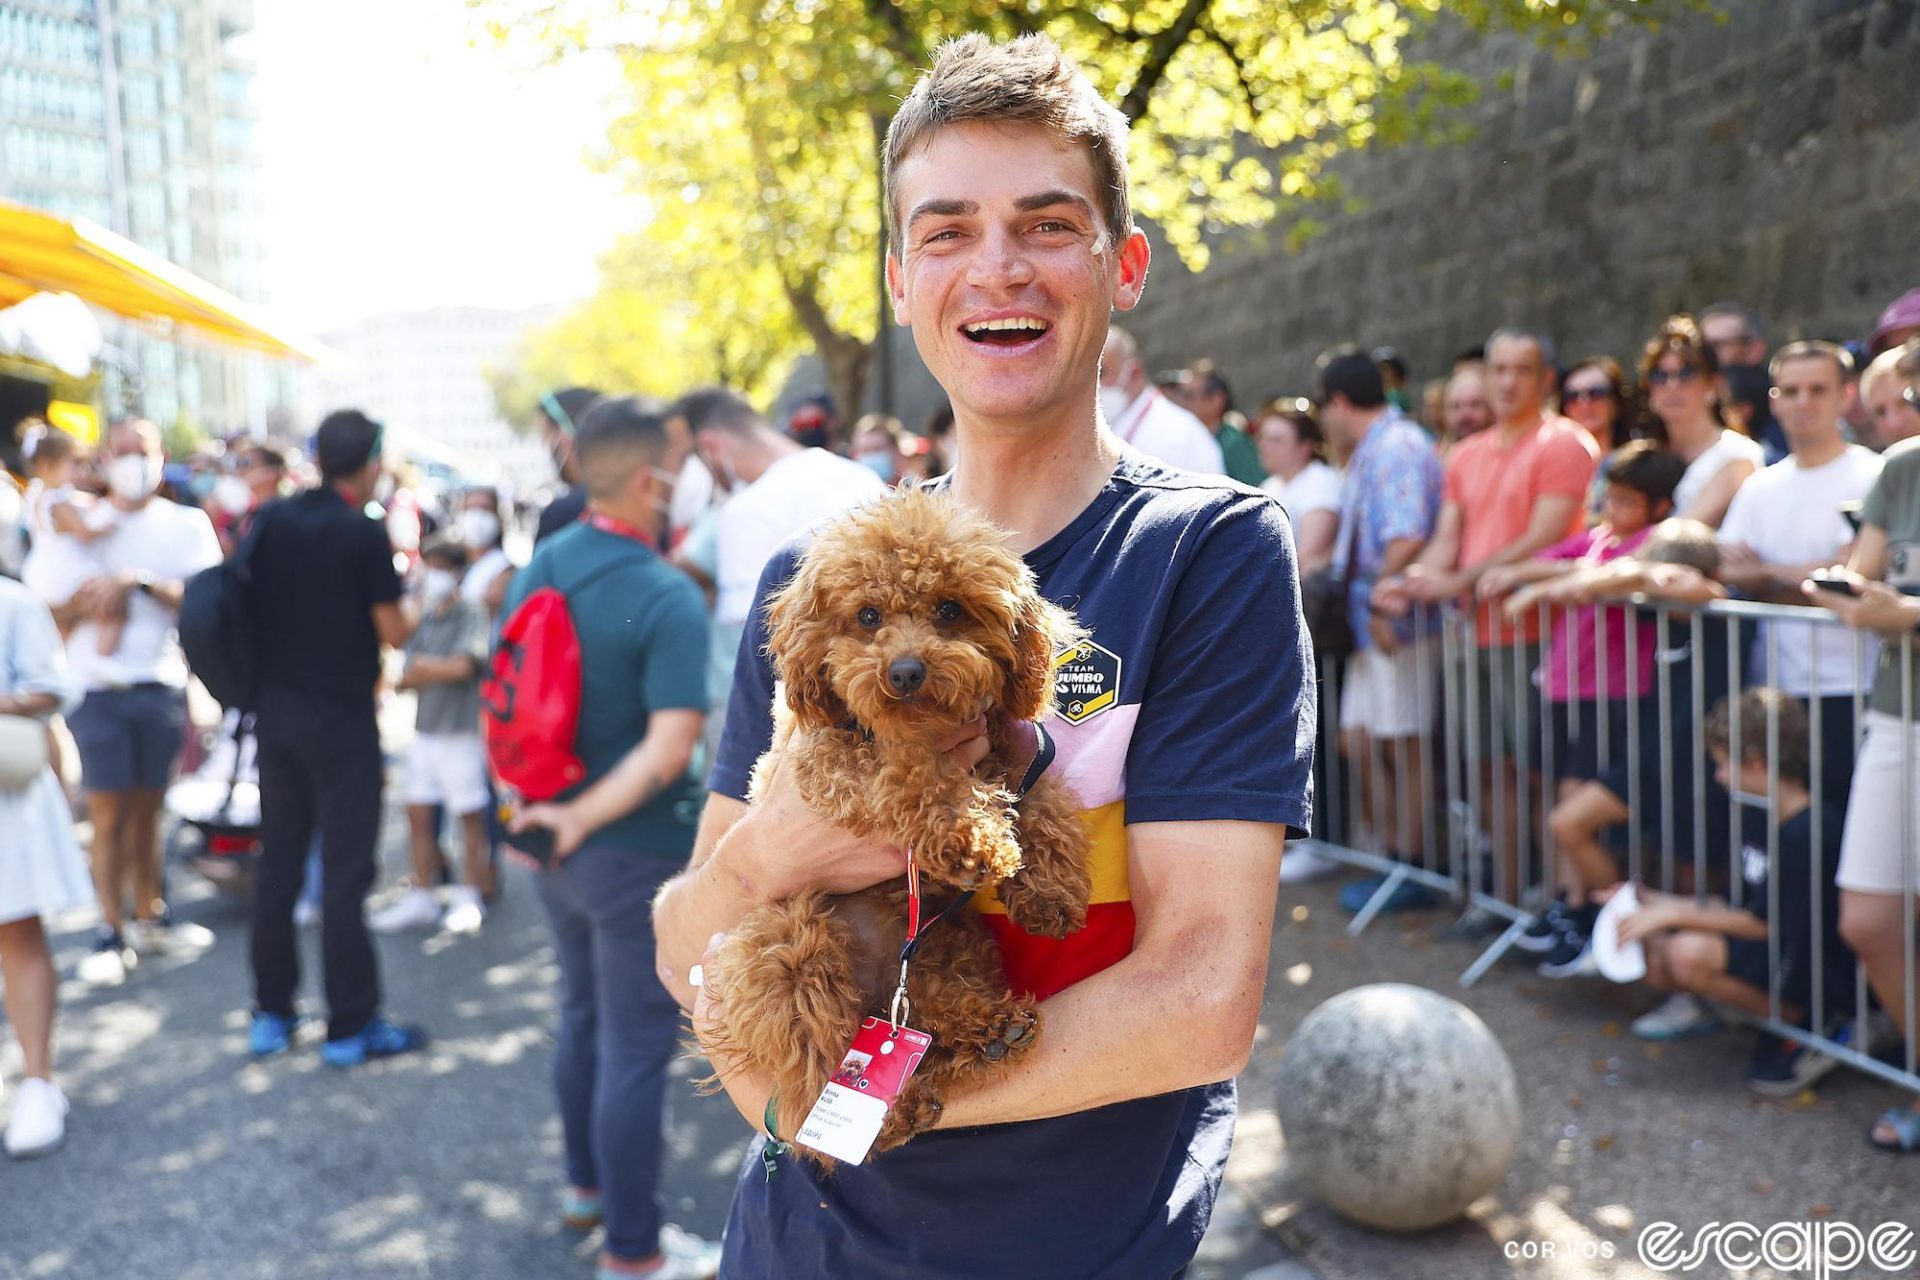 Sepp Kuss holds a small brown Goldendoodle. Kuss is facing the camera, smiling as he holds up the dog, who has its own race credential, labeled "Bimba Kuss." The dog is looking at the camera too, as if to say, am I not a 13/10?